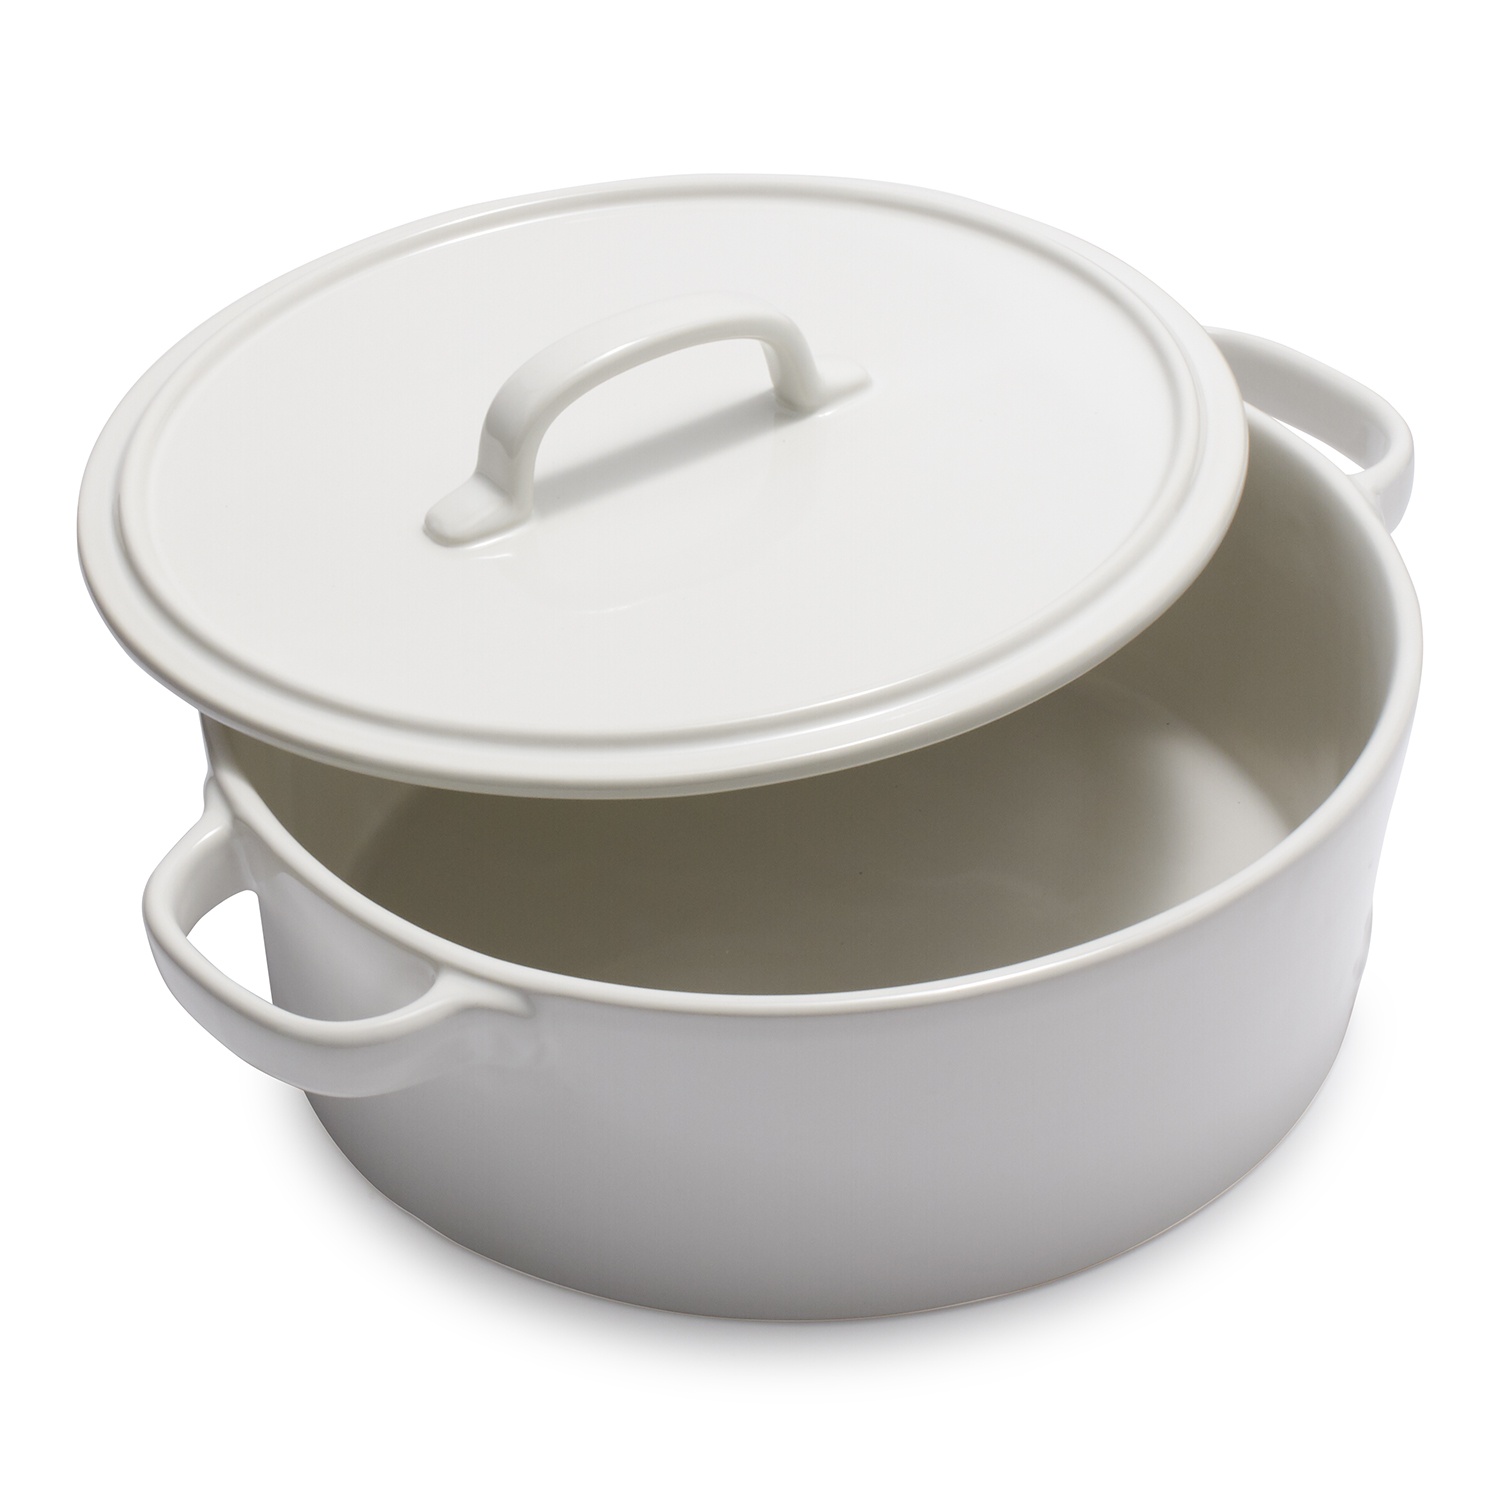 slide 1 of 1, La Marque 84 Oven to Table Round Casserole with Lid, White, 4.5 qt